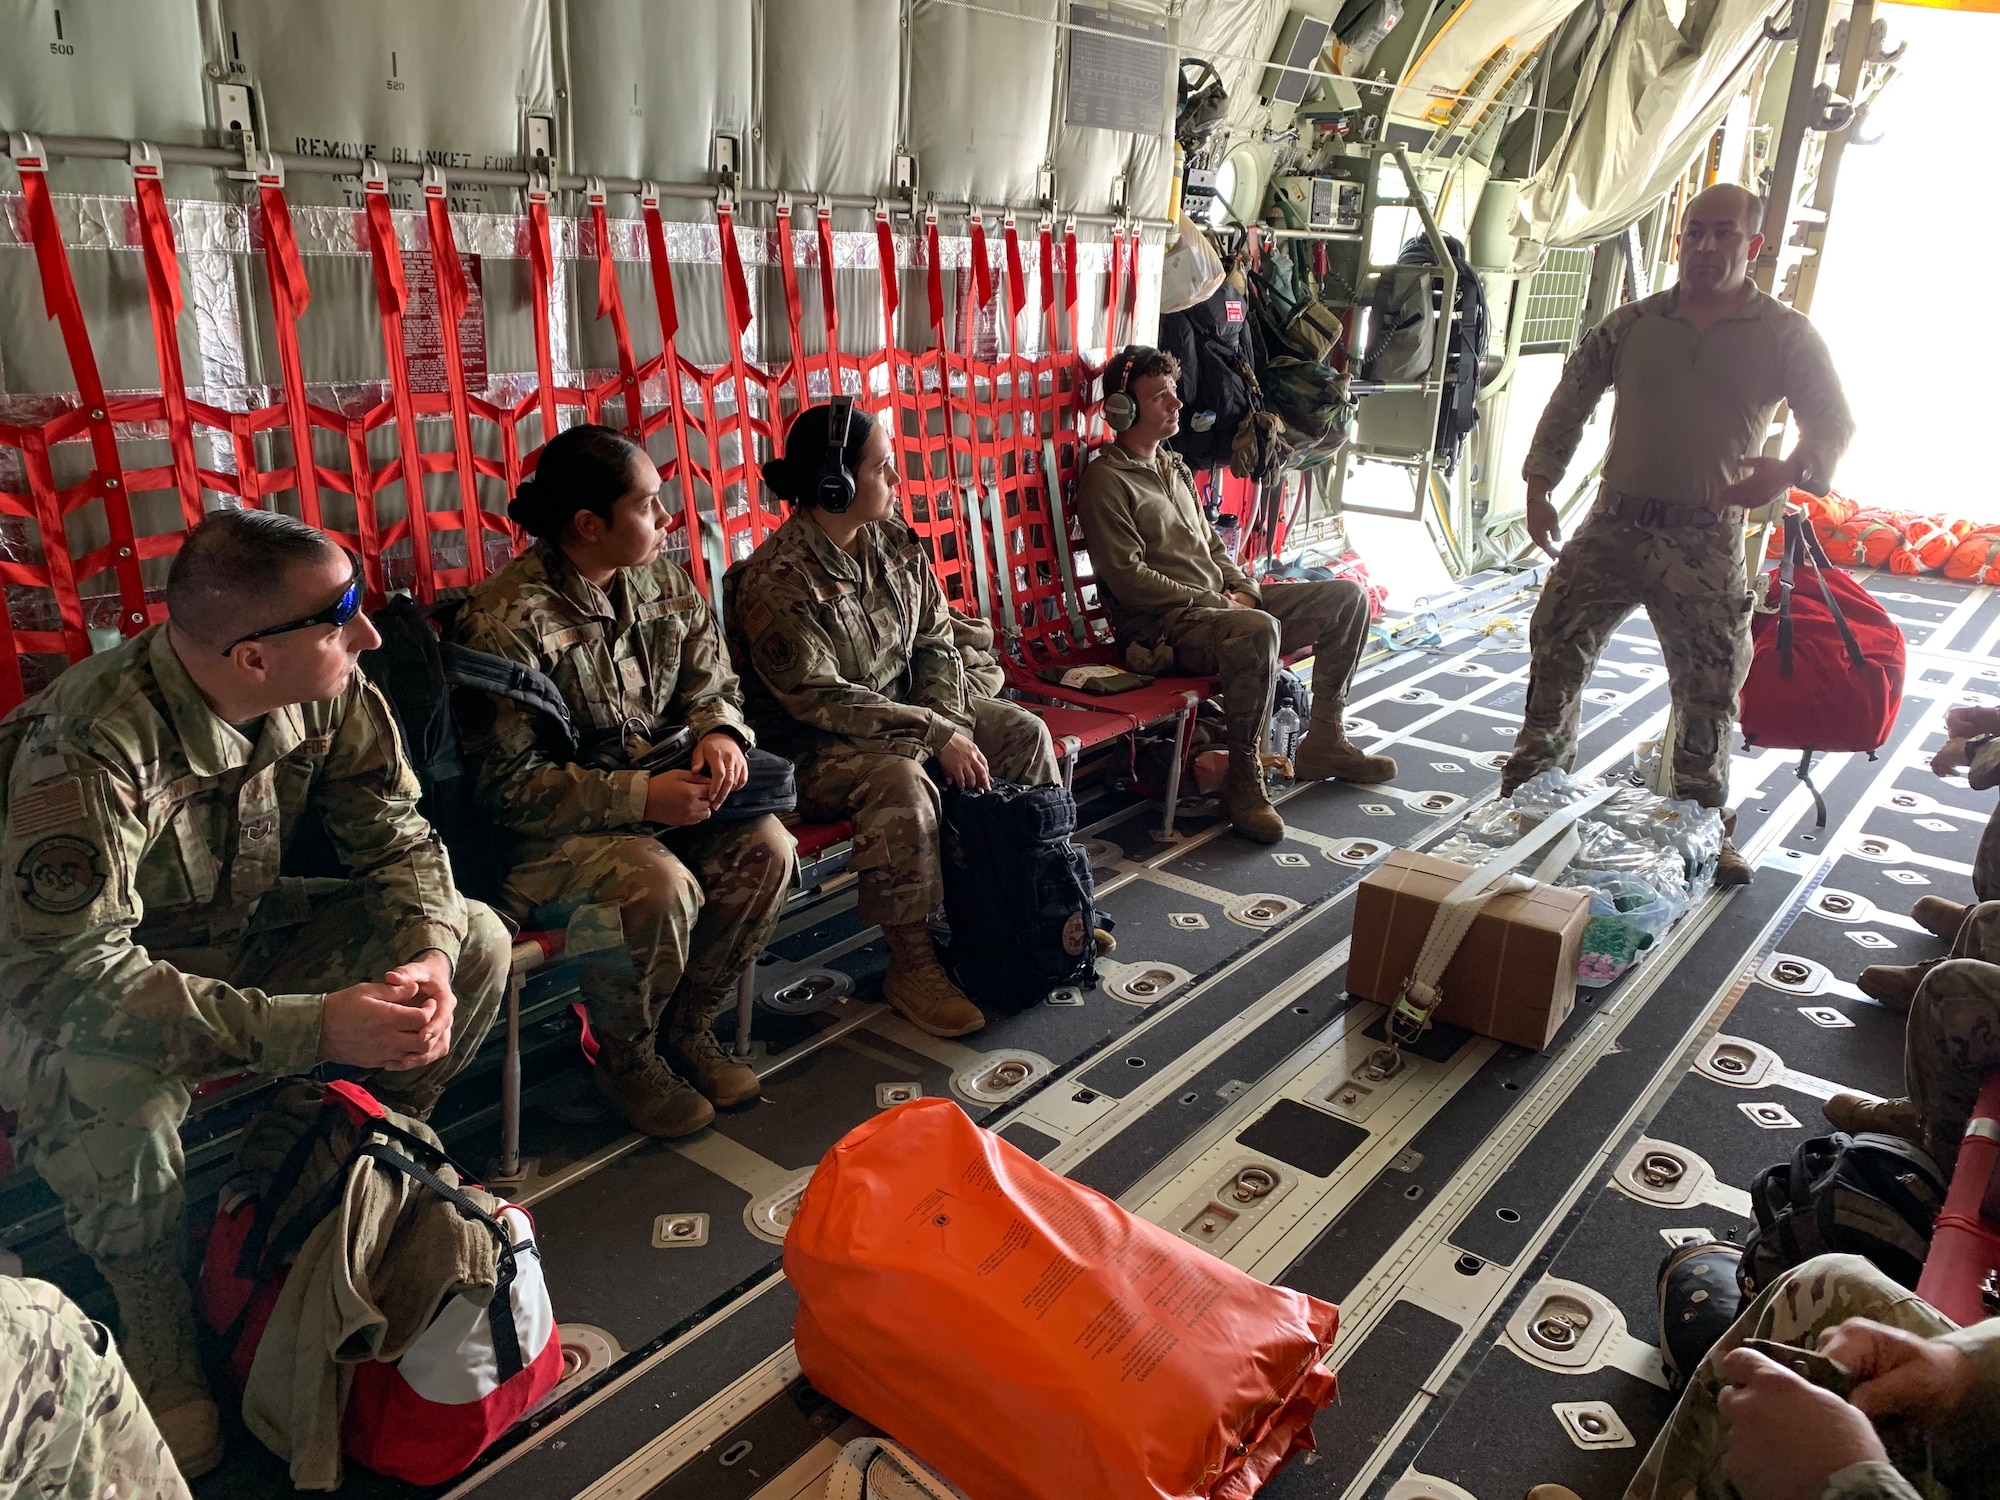 U.S. Air Force National Guardsmen with the 106th Rescue Wing listening to instructions given by C-130J Combat King II loadmaster Tech. Sgt. Steven Benza June 21, 2023 at F.S Gabreski Air National Guard Base, Westhampton Beach, New York. The Airmen were preparing to be scanners for the missing Titan submarine in support of the Coast Guard. (U.S. Air Force National Guard photo by Capt Campbell)